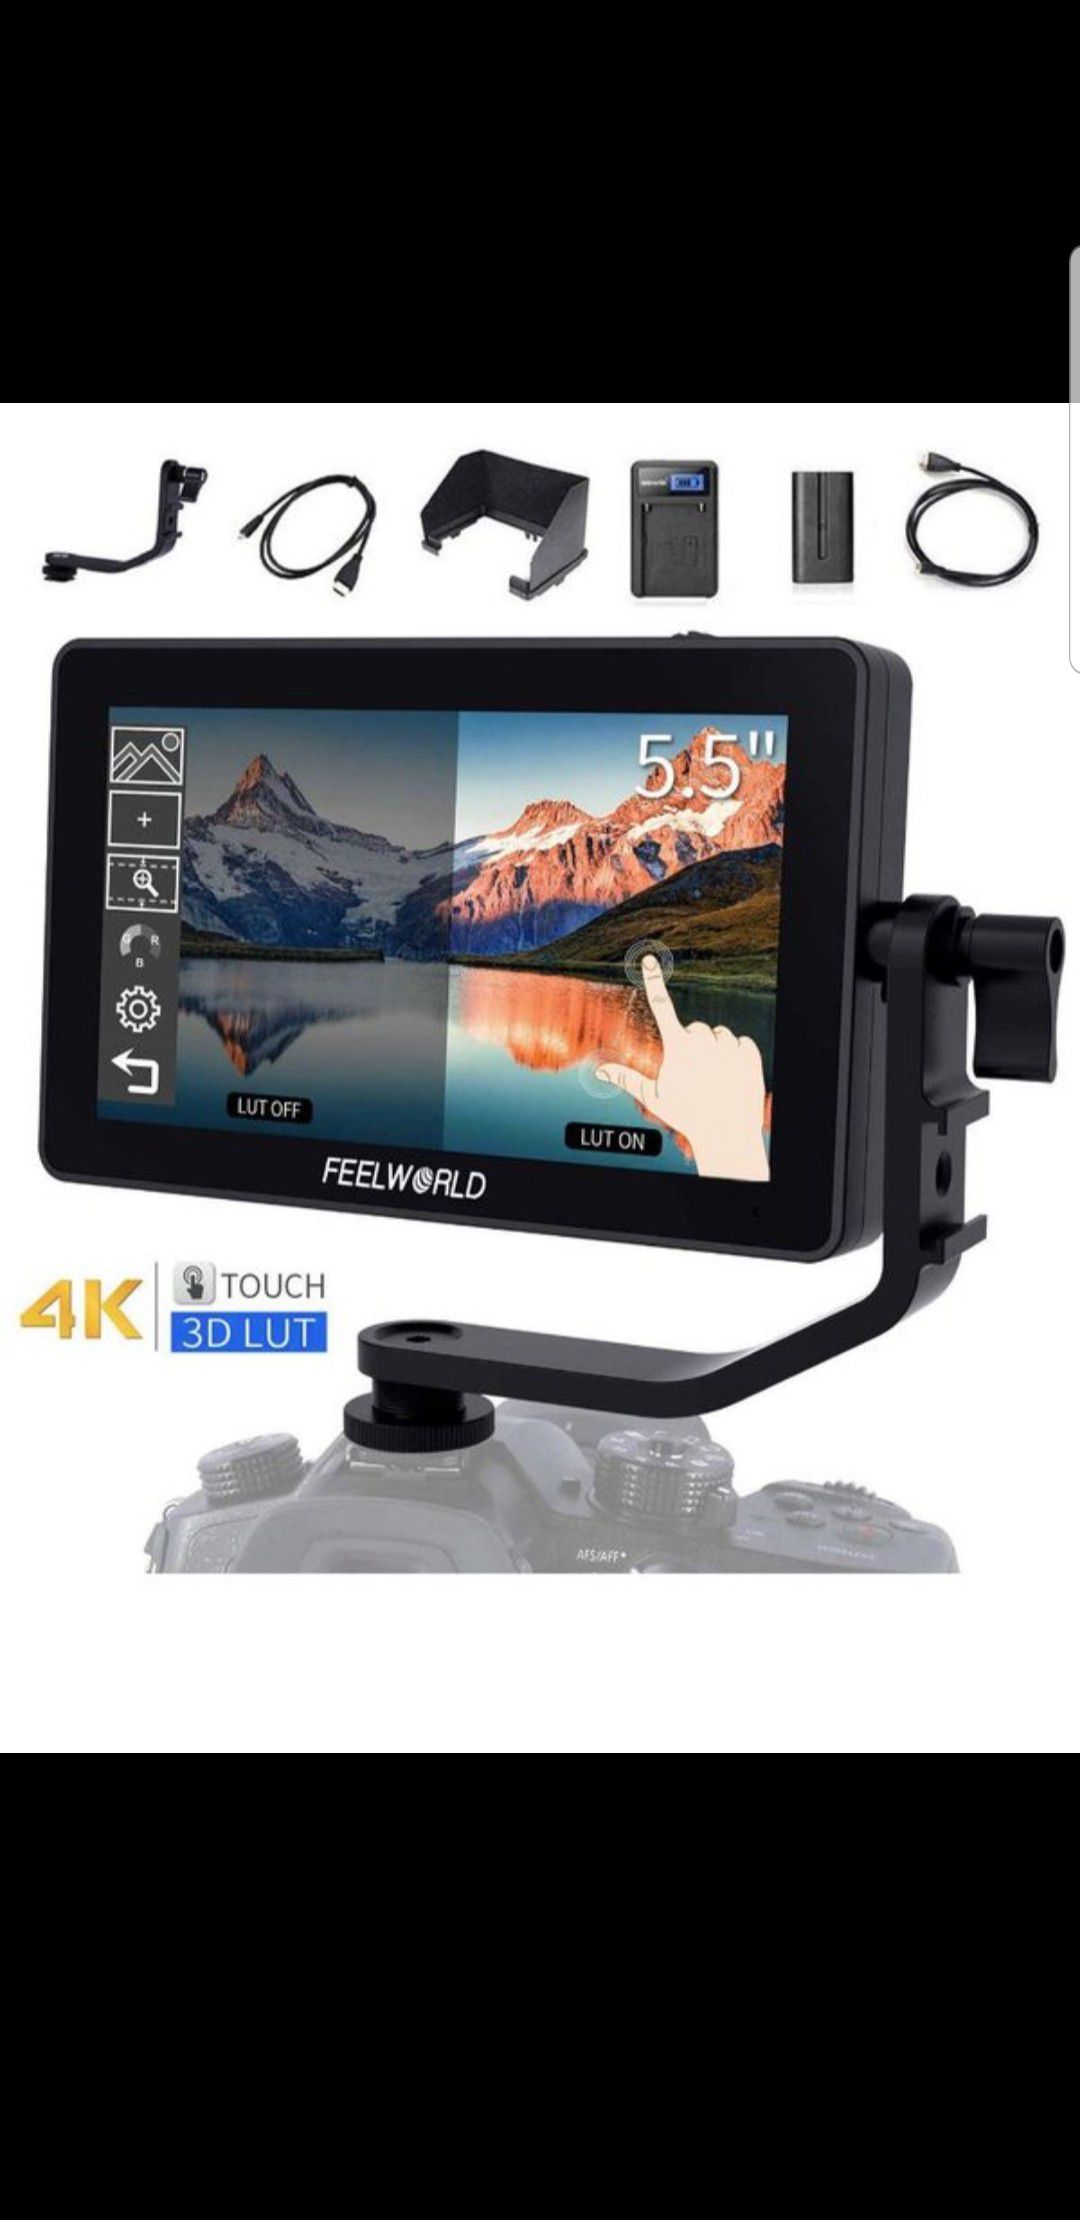 F6 Plus 5.5 Inch IPS Full HD1920x1080 for DSLR Cameras Field Monitor Suppor 4K HDMI 3D LUT Touch Screen with Tilt Arm Power Output